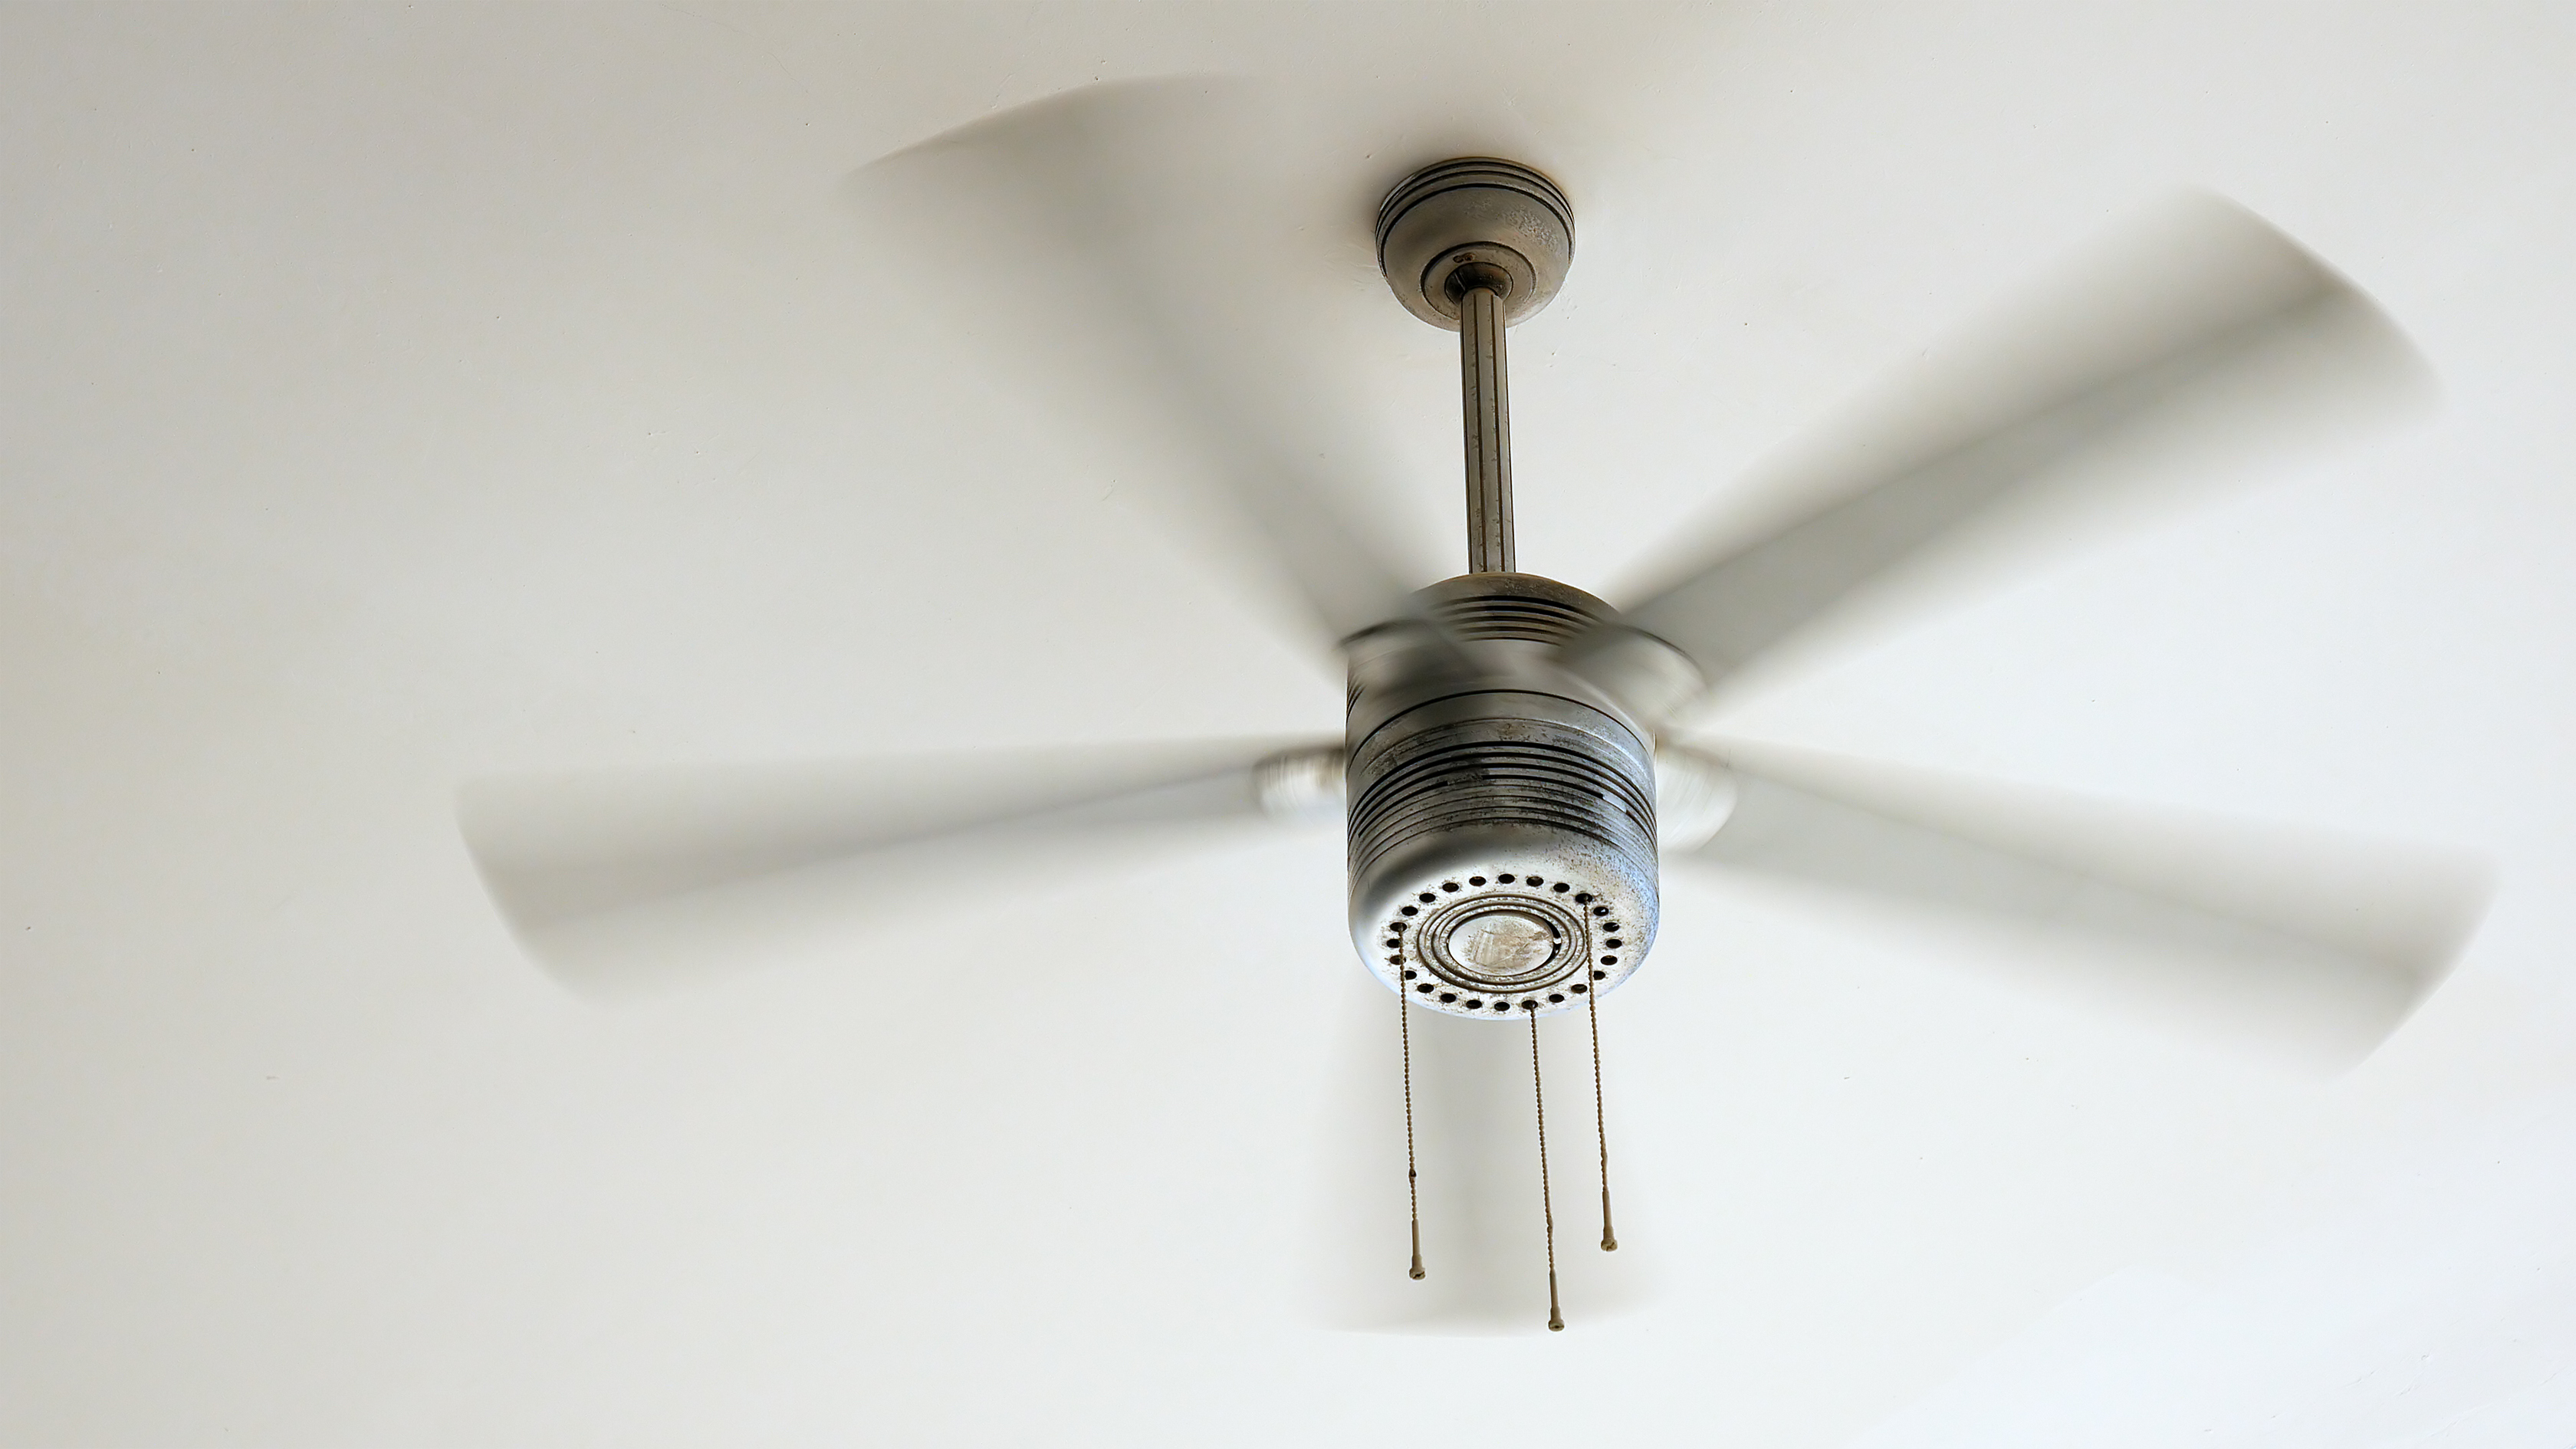 What Direction Should Ceiling Fan Turn In Summer